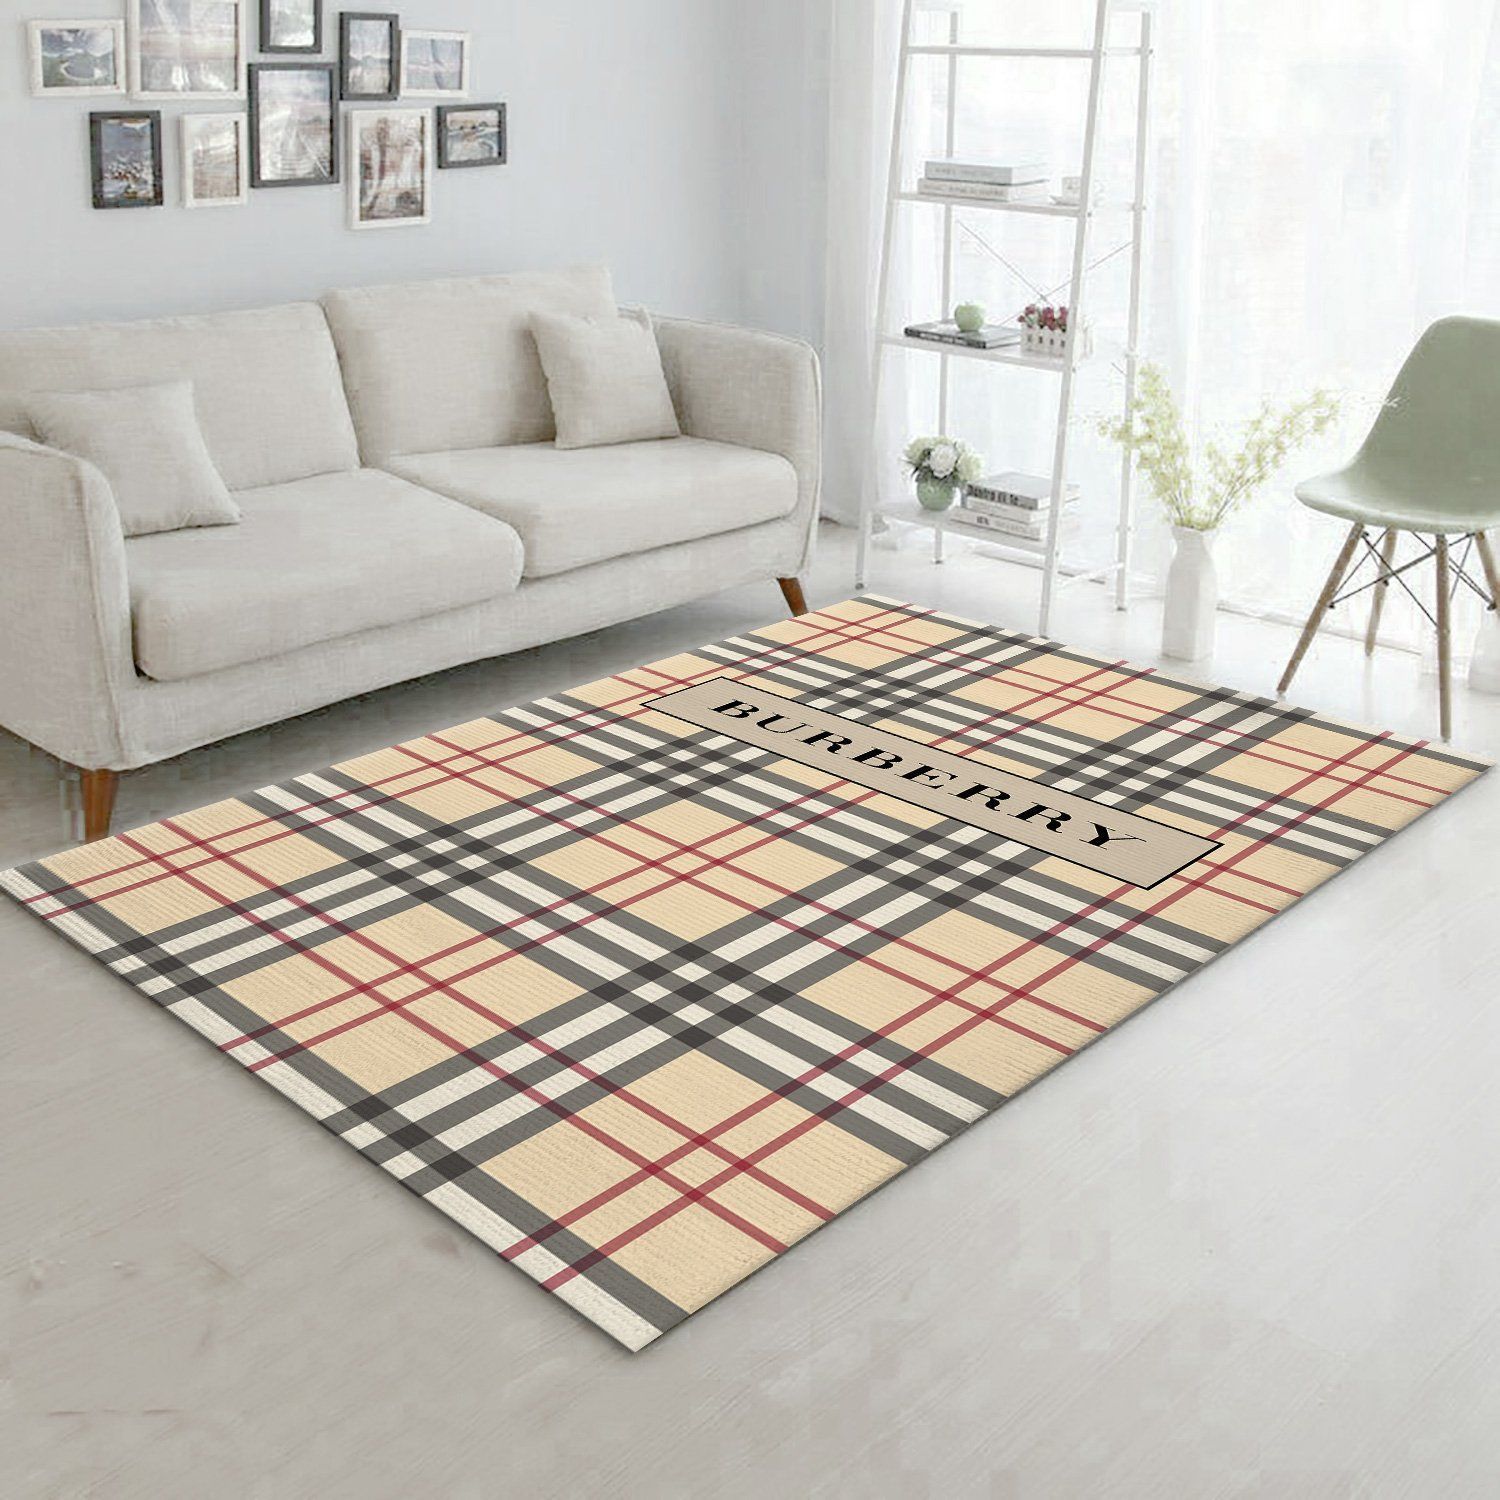 Burberry Logo Area Rugs Living Room Carpet FN241223 Brands Fashion Floor Decor The US Decor - Indoor Outdoor Rugs 2